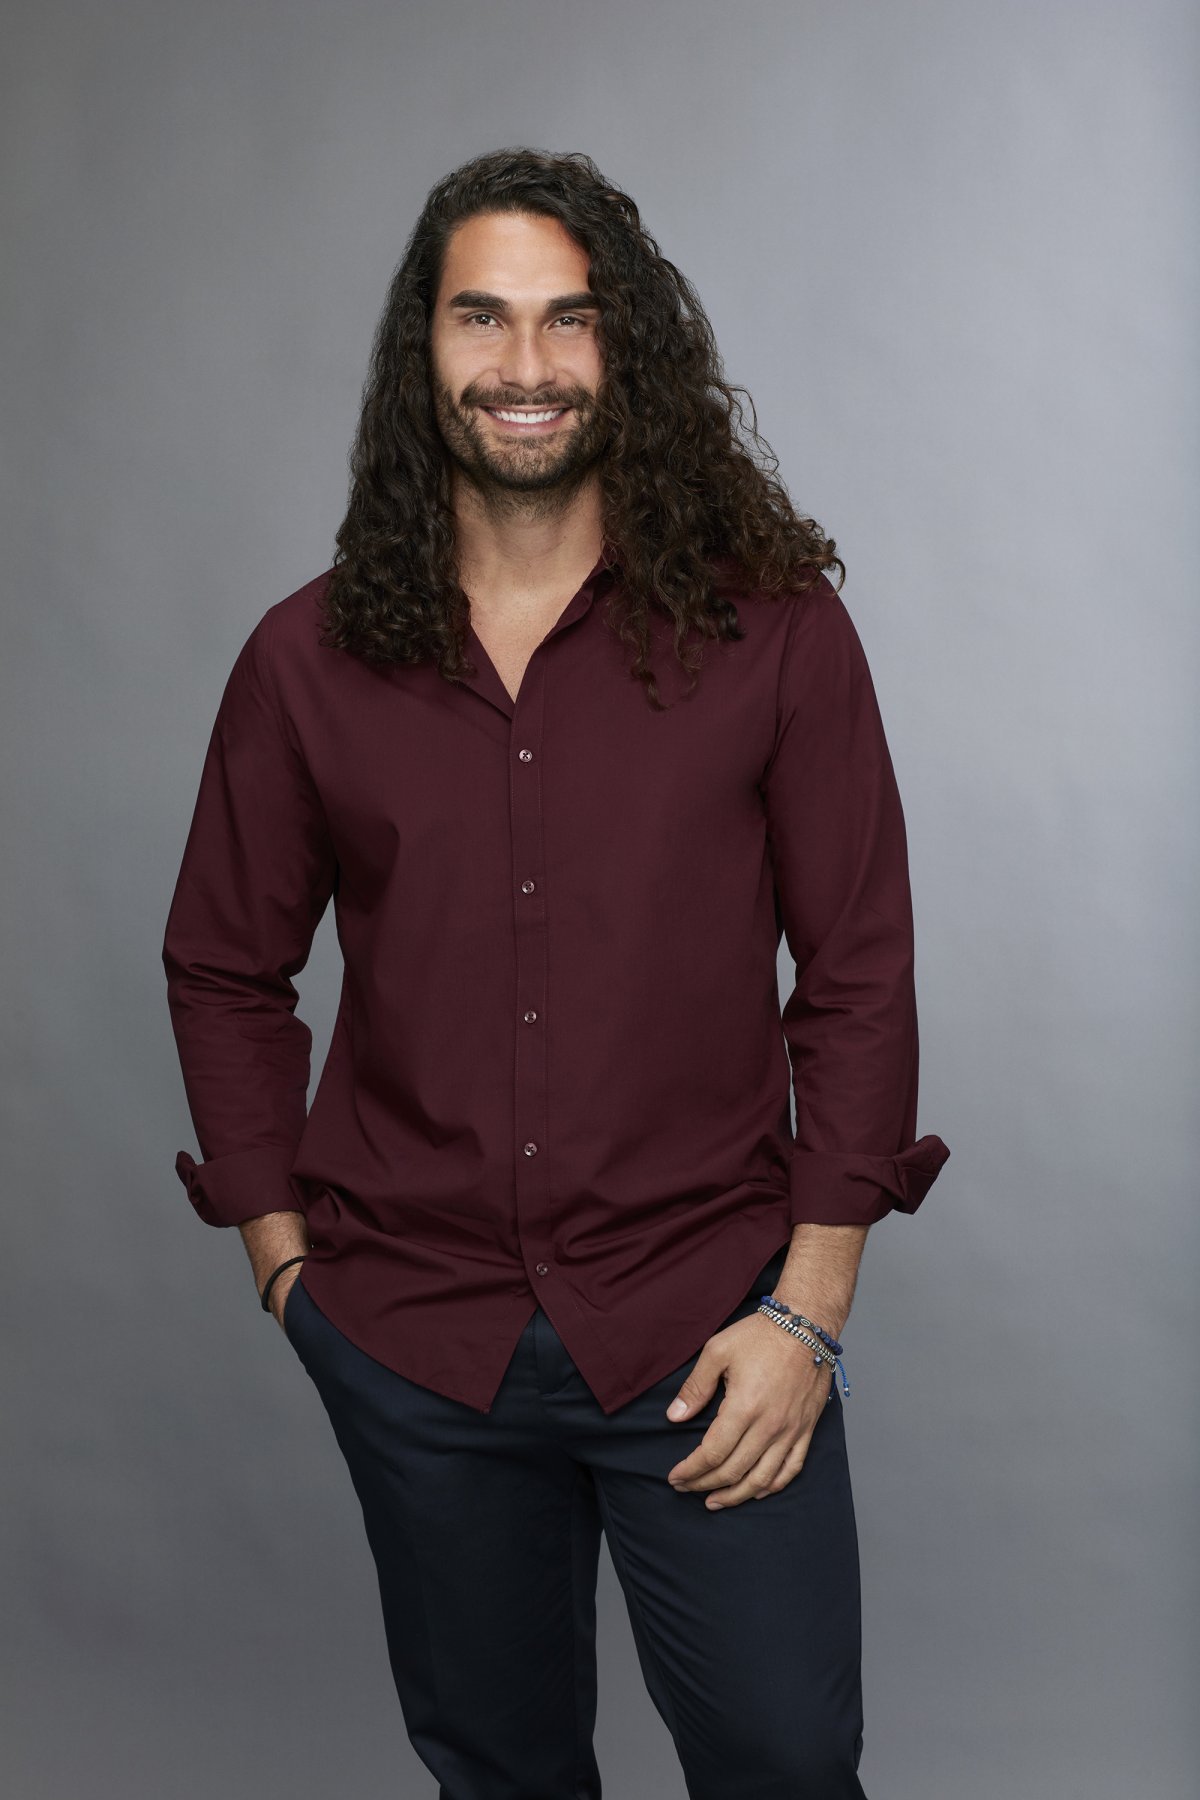 Leo Dottavio -- 5 things to know about Becca Kufrin's 'The Bachelorette' bachelor ...1200 x 1800